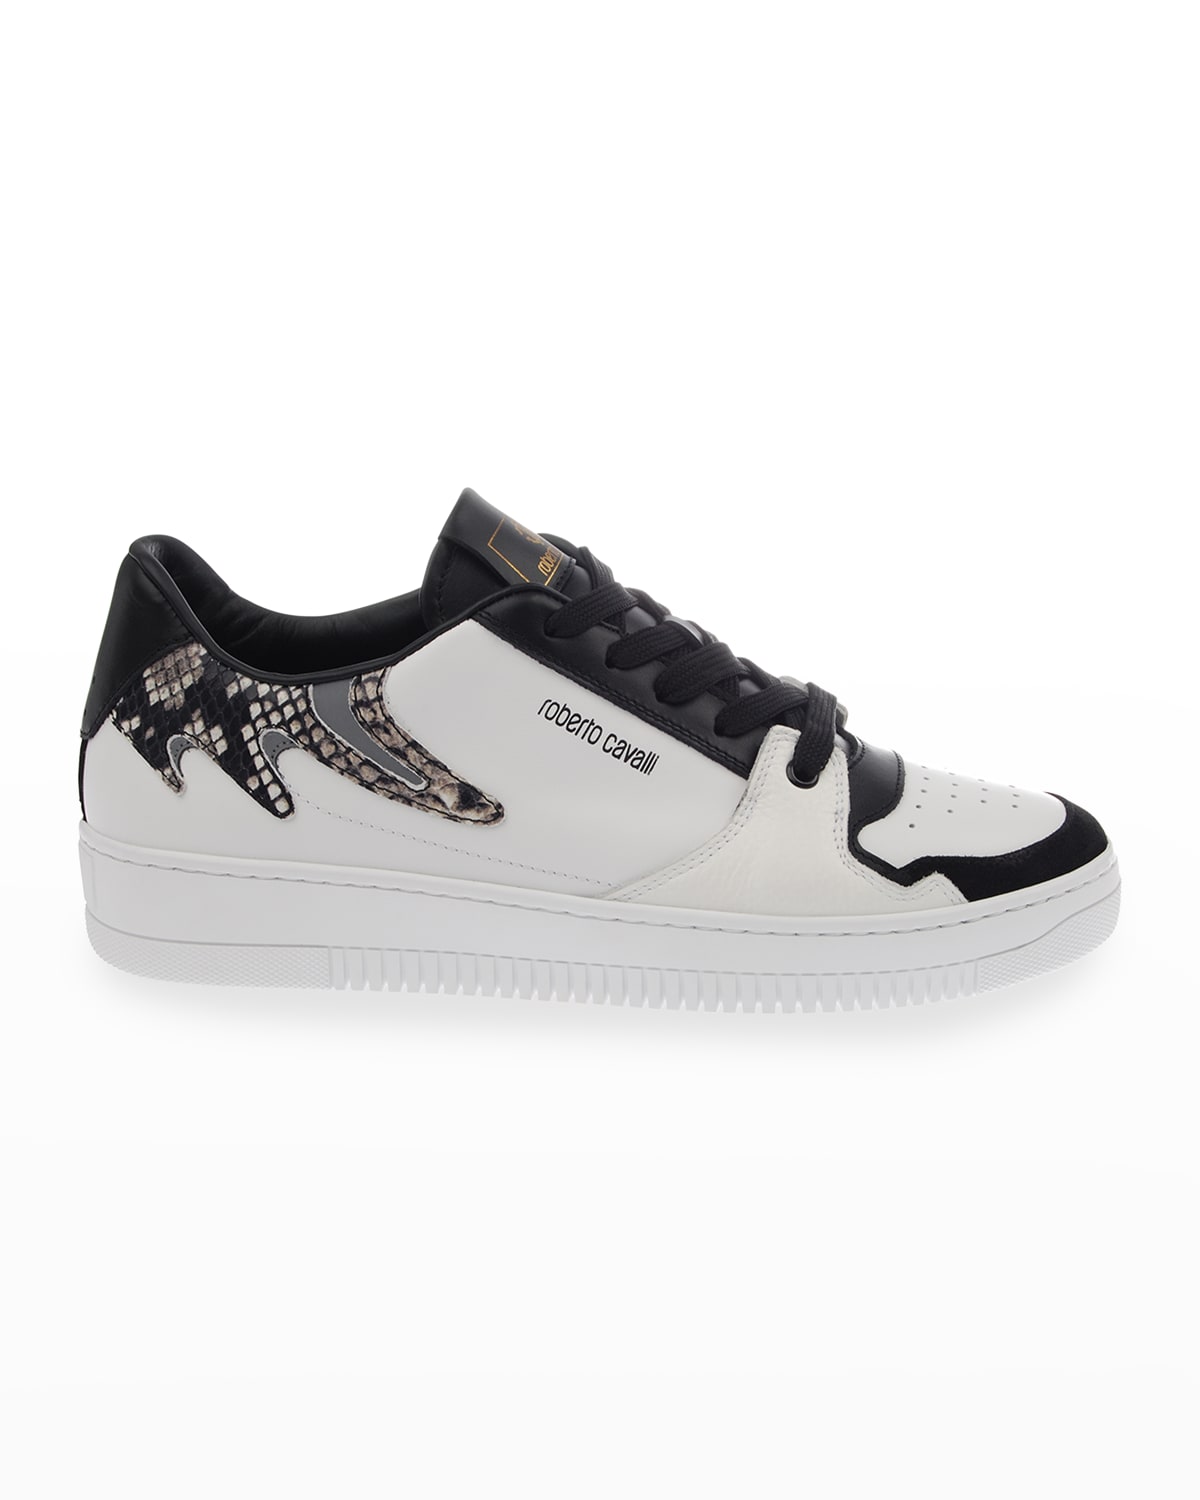 Men's Snake-Print Leather/Suede Low-Top Sneakers